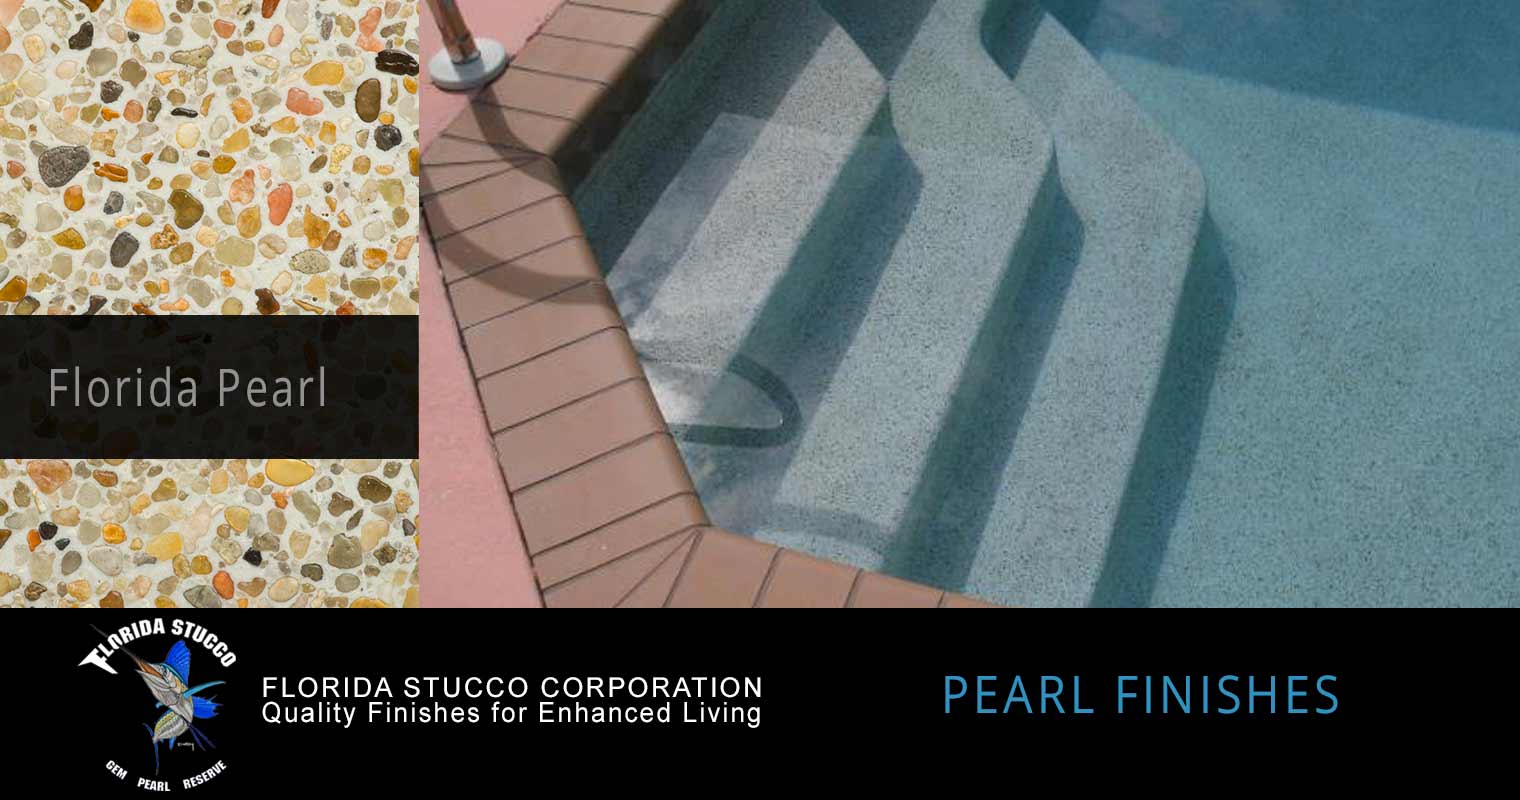 https://www.floridastucco.com/images/pearl-finishes/florida-pearl-3.jpg